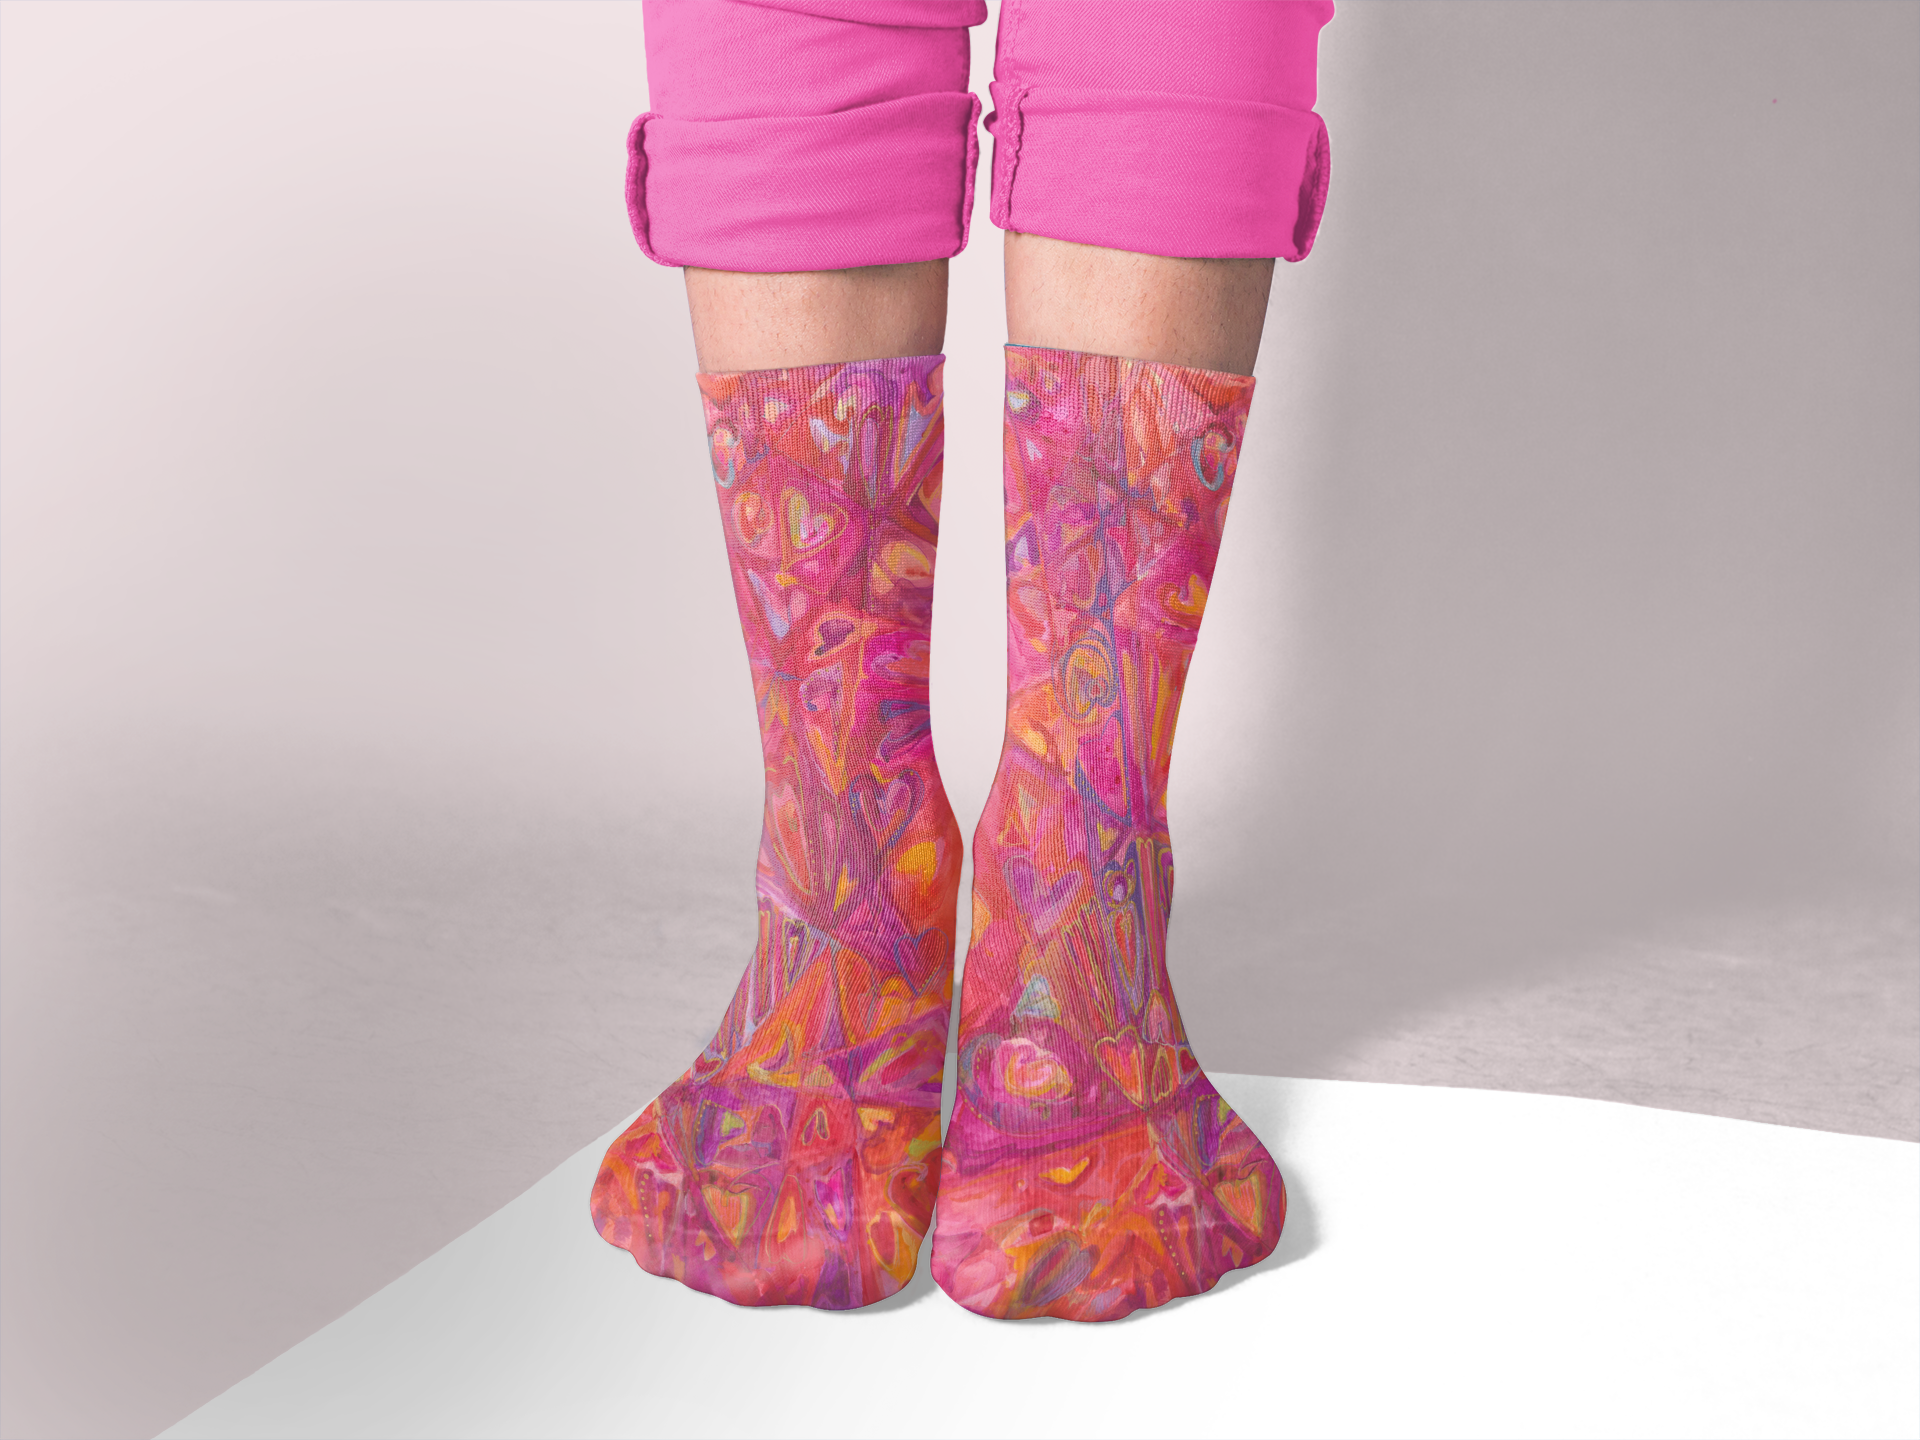 man-wearing-socks-template-while-standing-on-a-multicolor-surface-a15598 copy 2.png